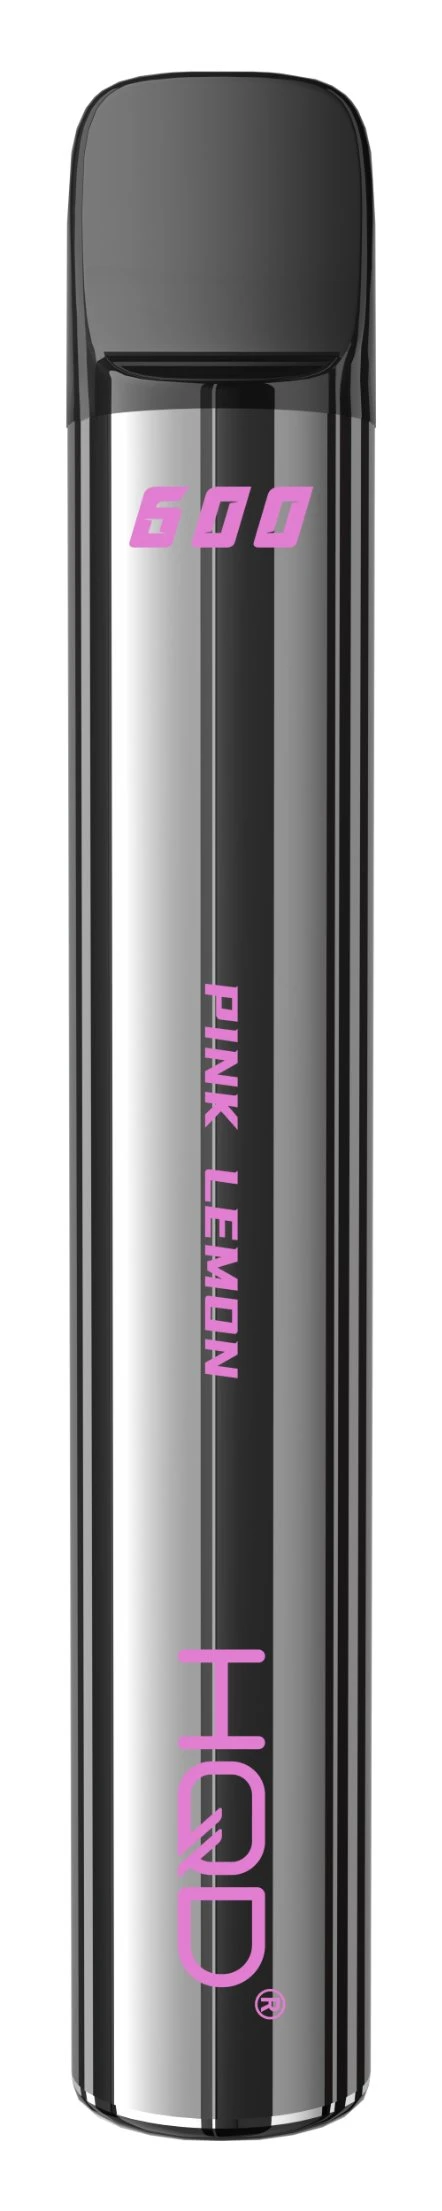 Hqd Tpd Vape Product: 600, 600 Puffs